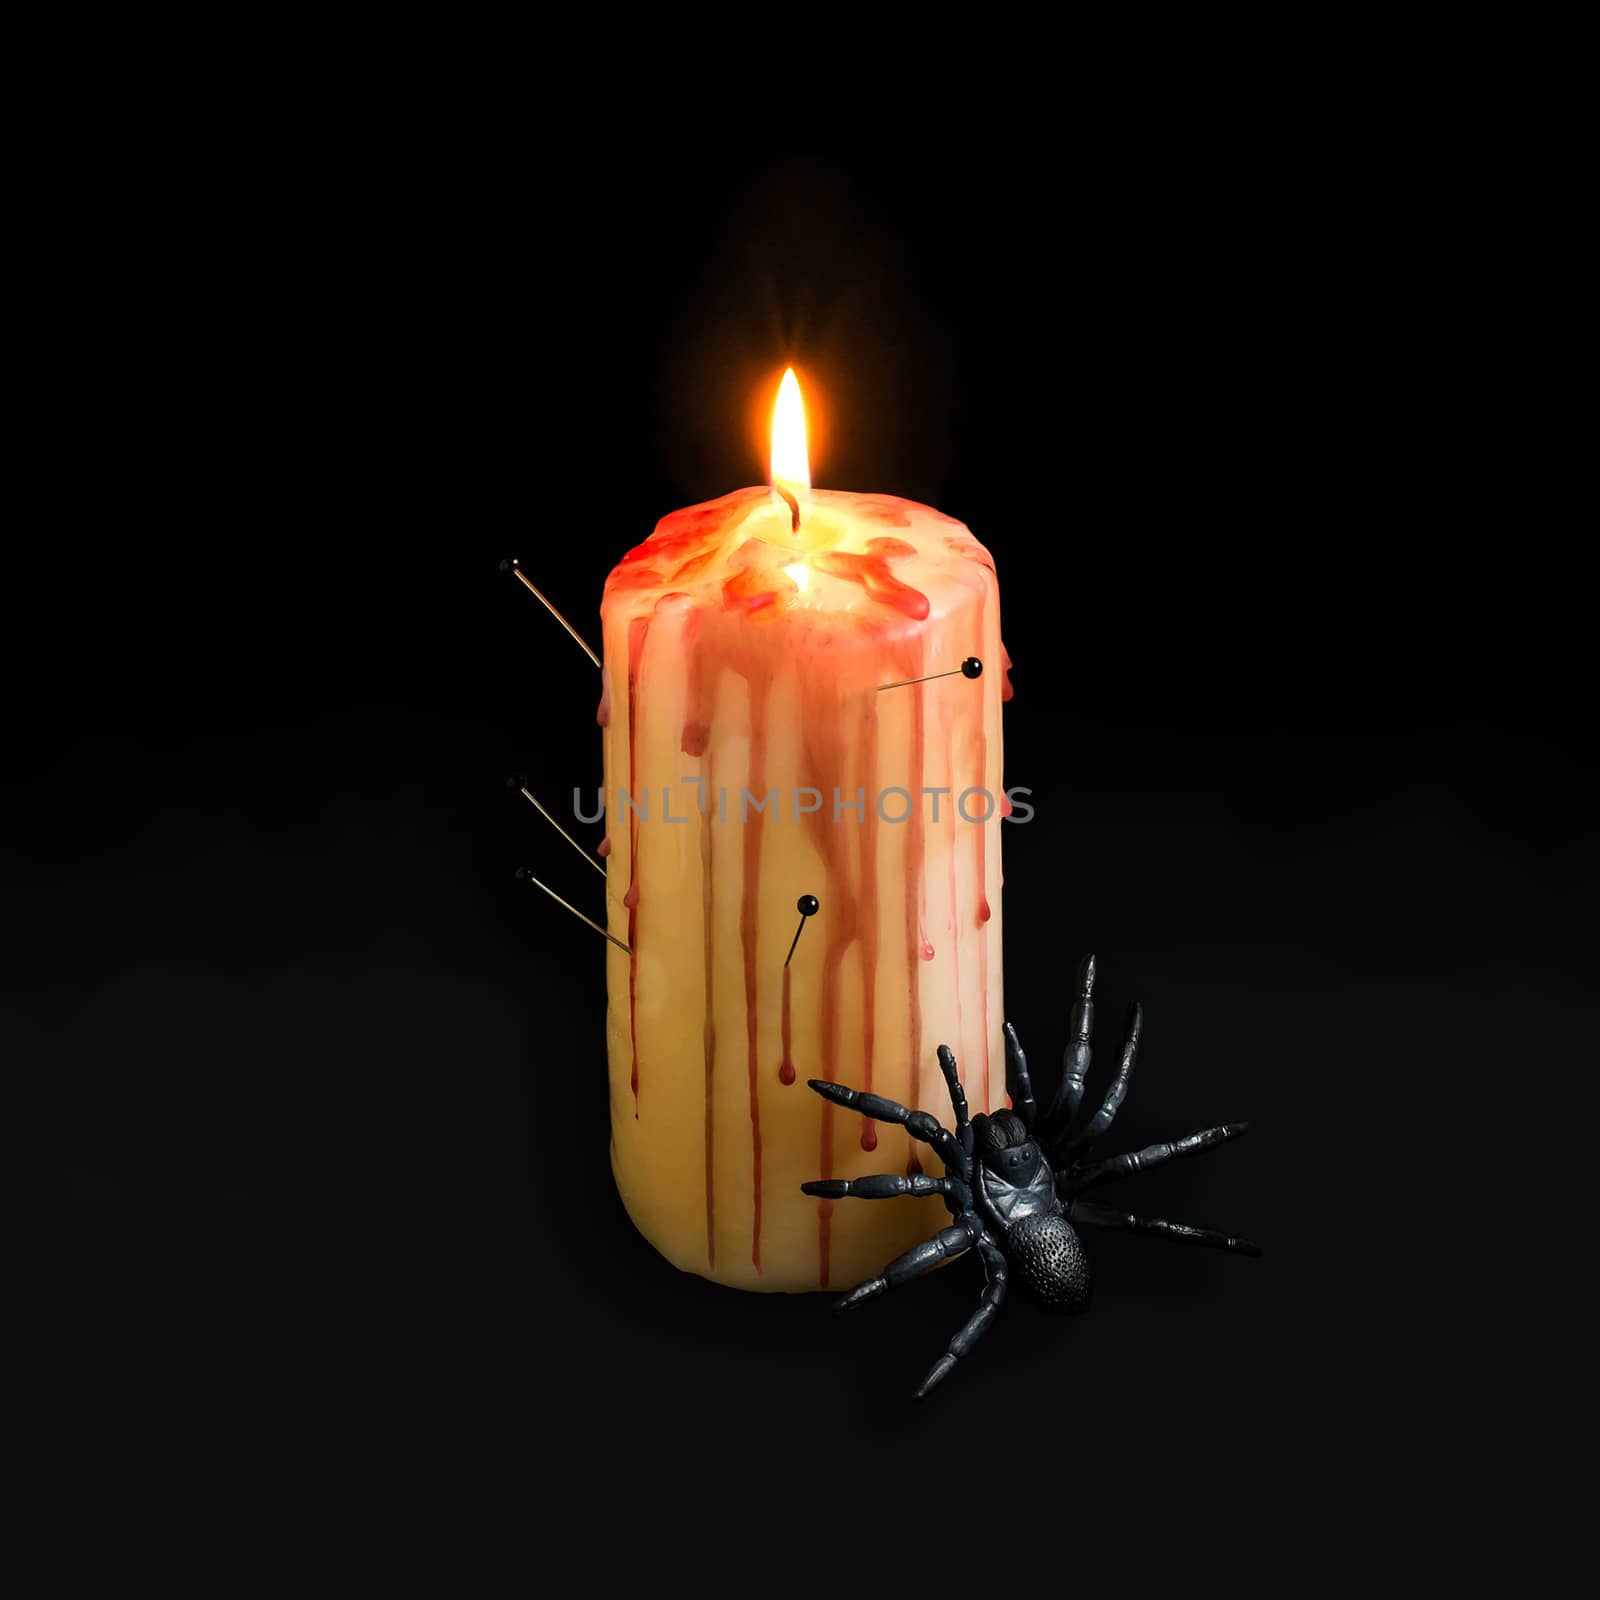 Homemade decor for Halloween. Candle pierced with needles with red brooks and drops like blood and spider on black background. Minimal style. Original design